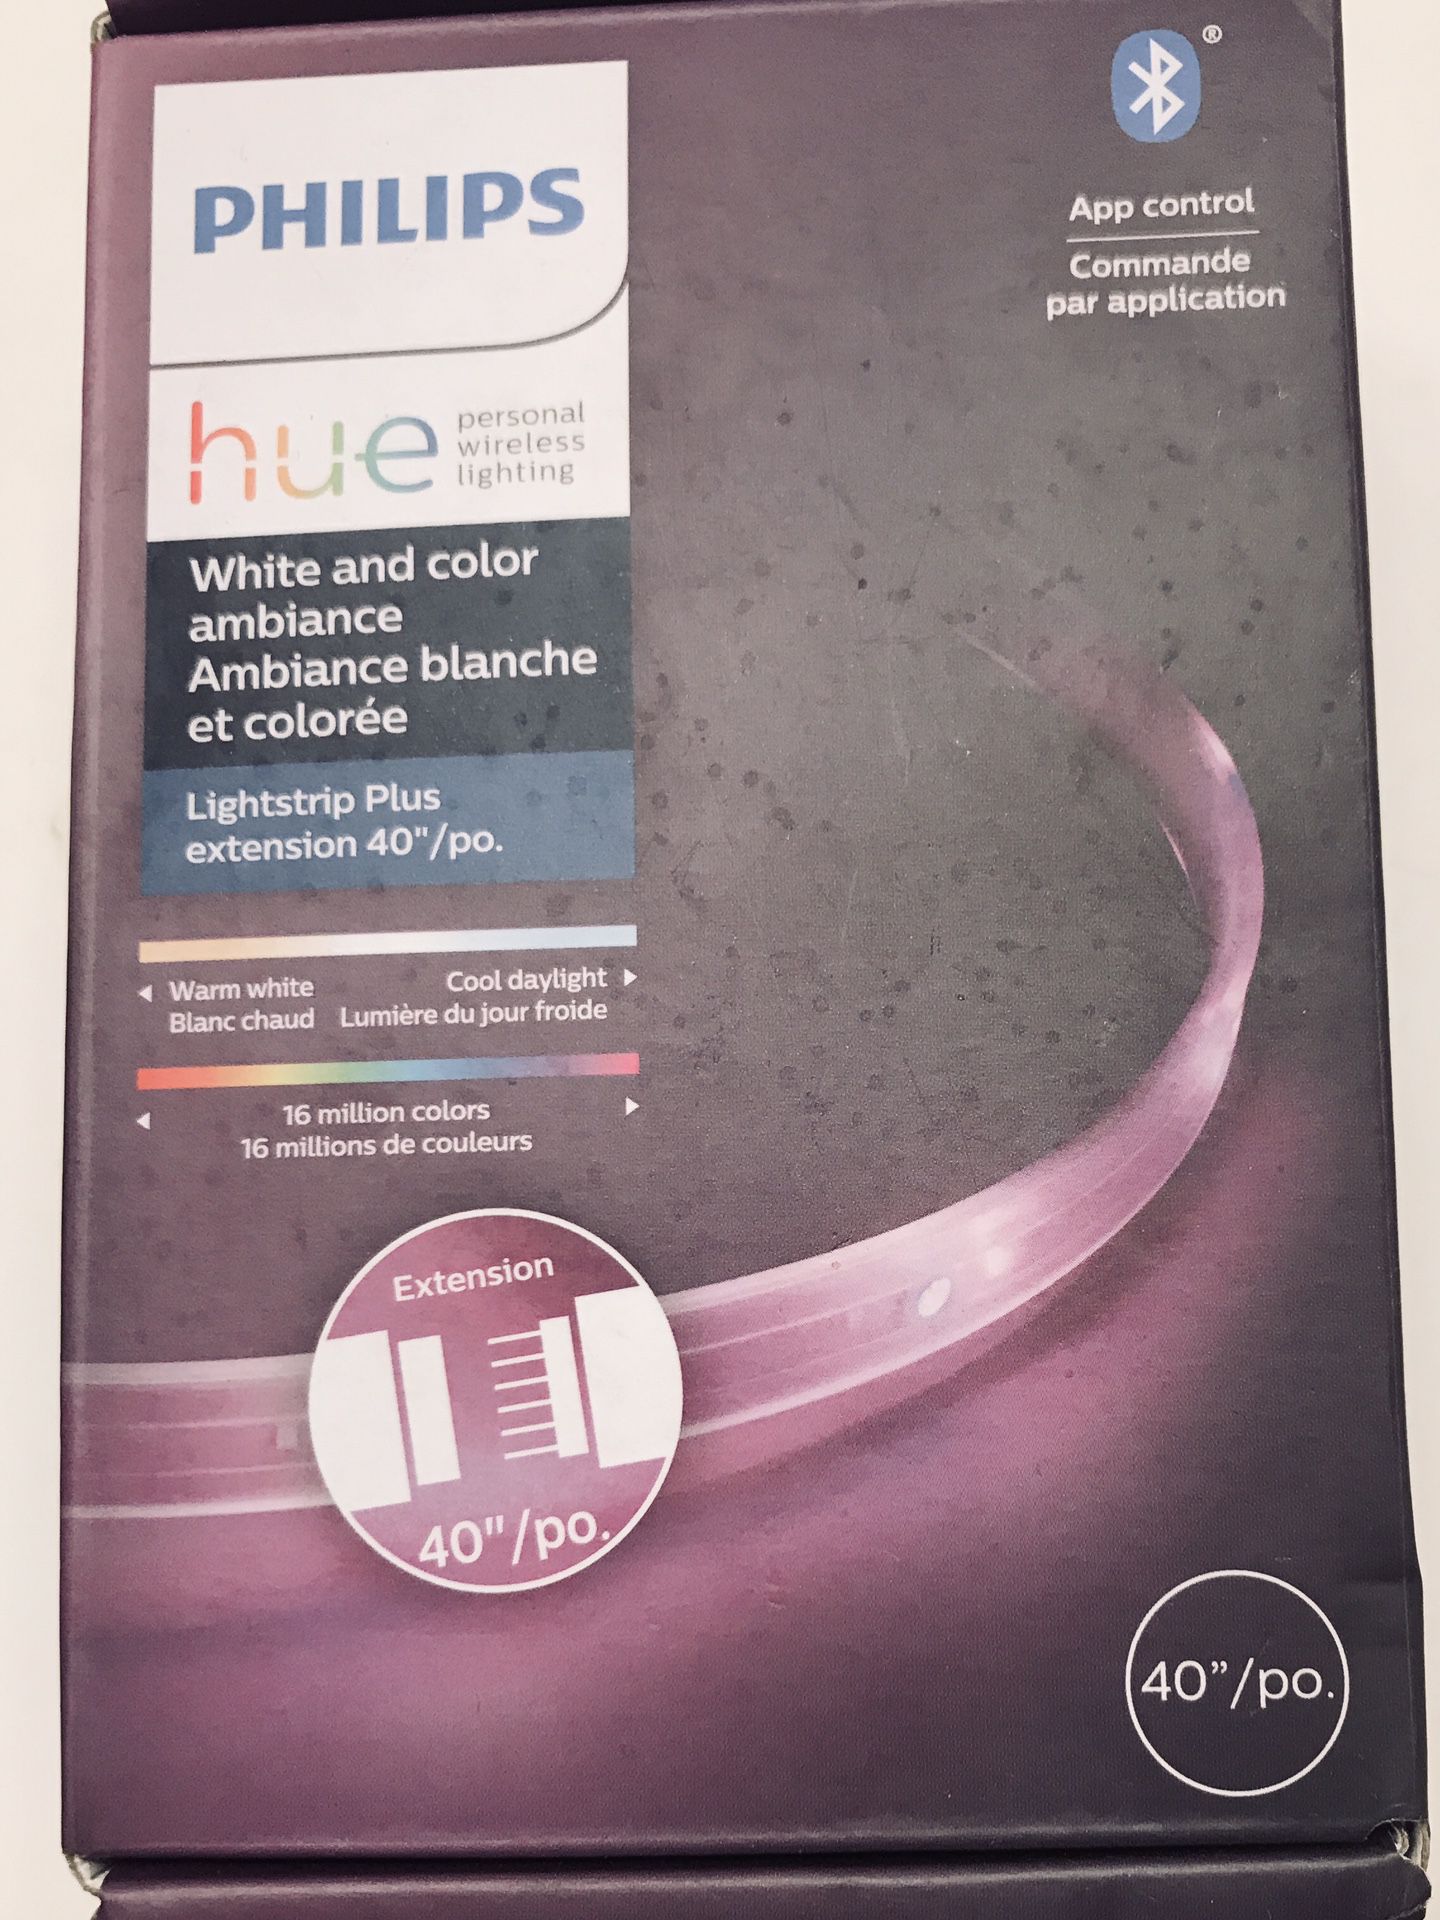 Hue Light And Color Ambiance Light strip plus extension 40 inches